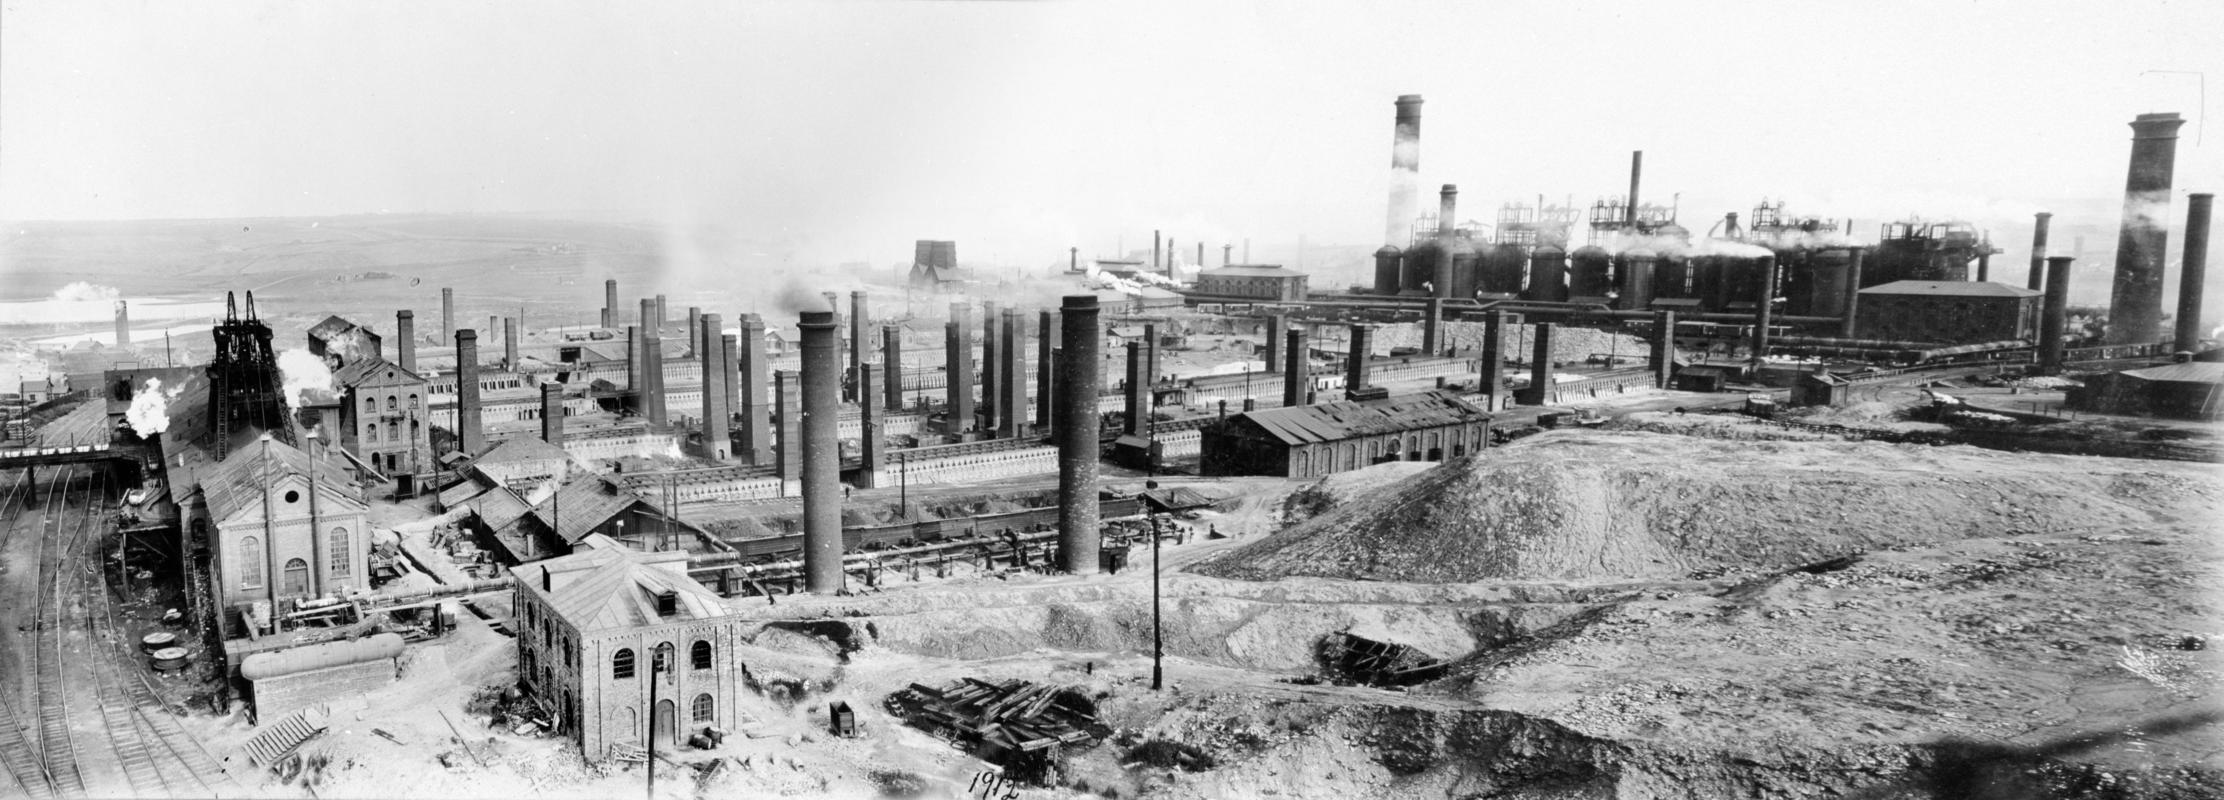 Panorama of Tsentralnaia Colliery and coke oven batteries of the New Russia Company.